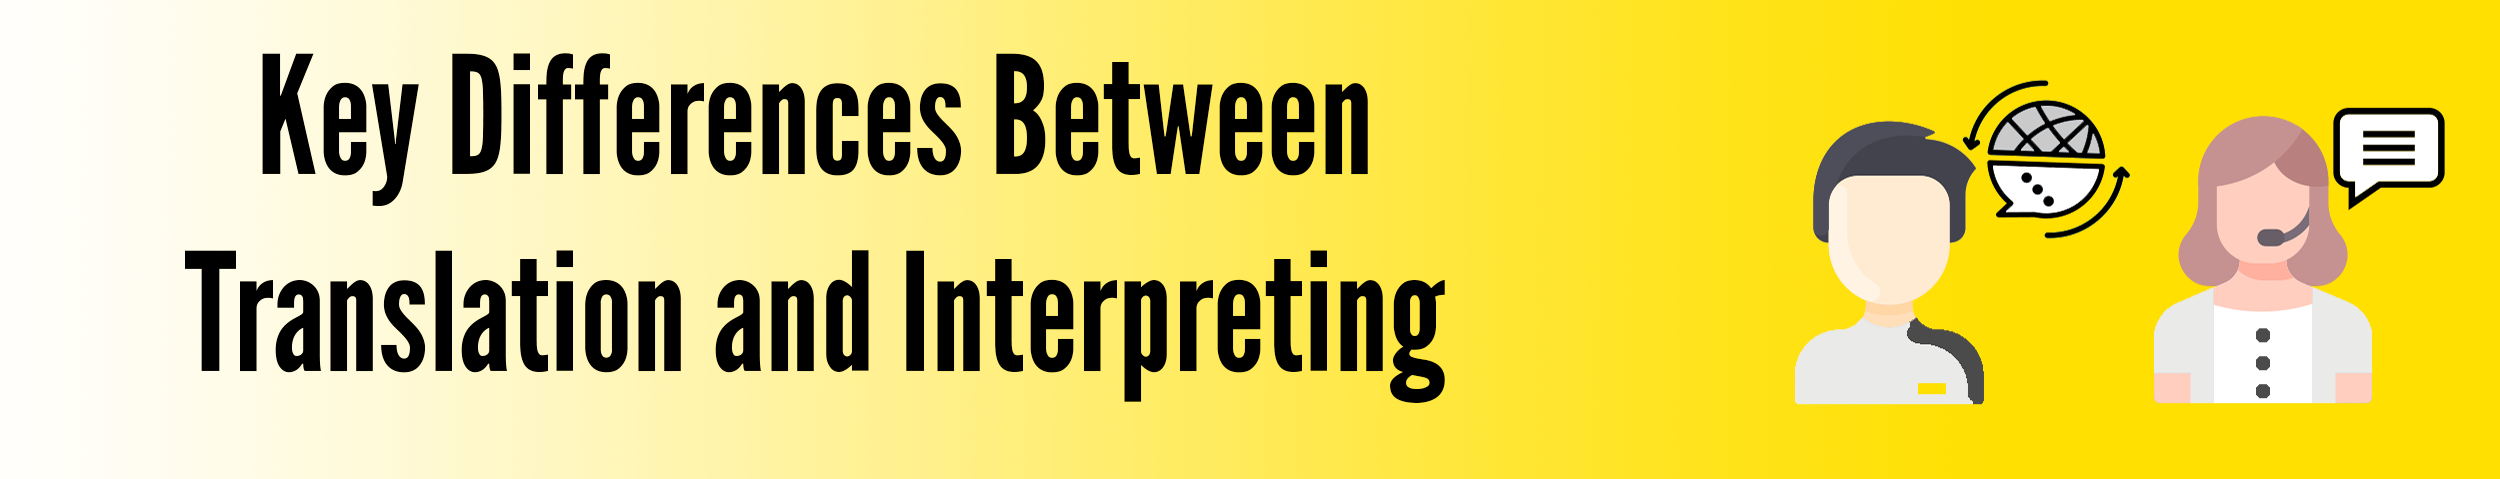 Key Differences Between Translation and Interpreting